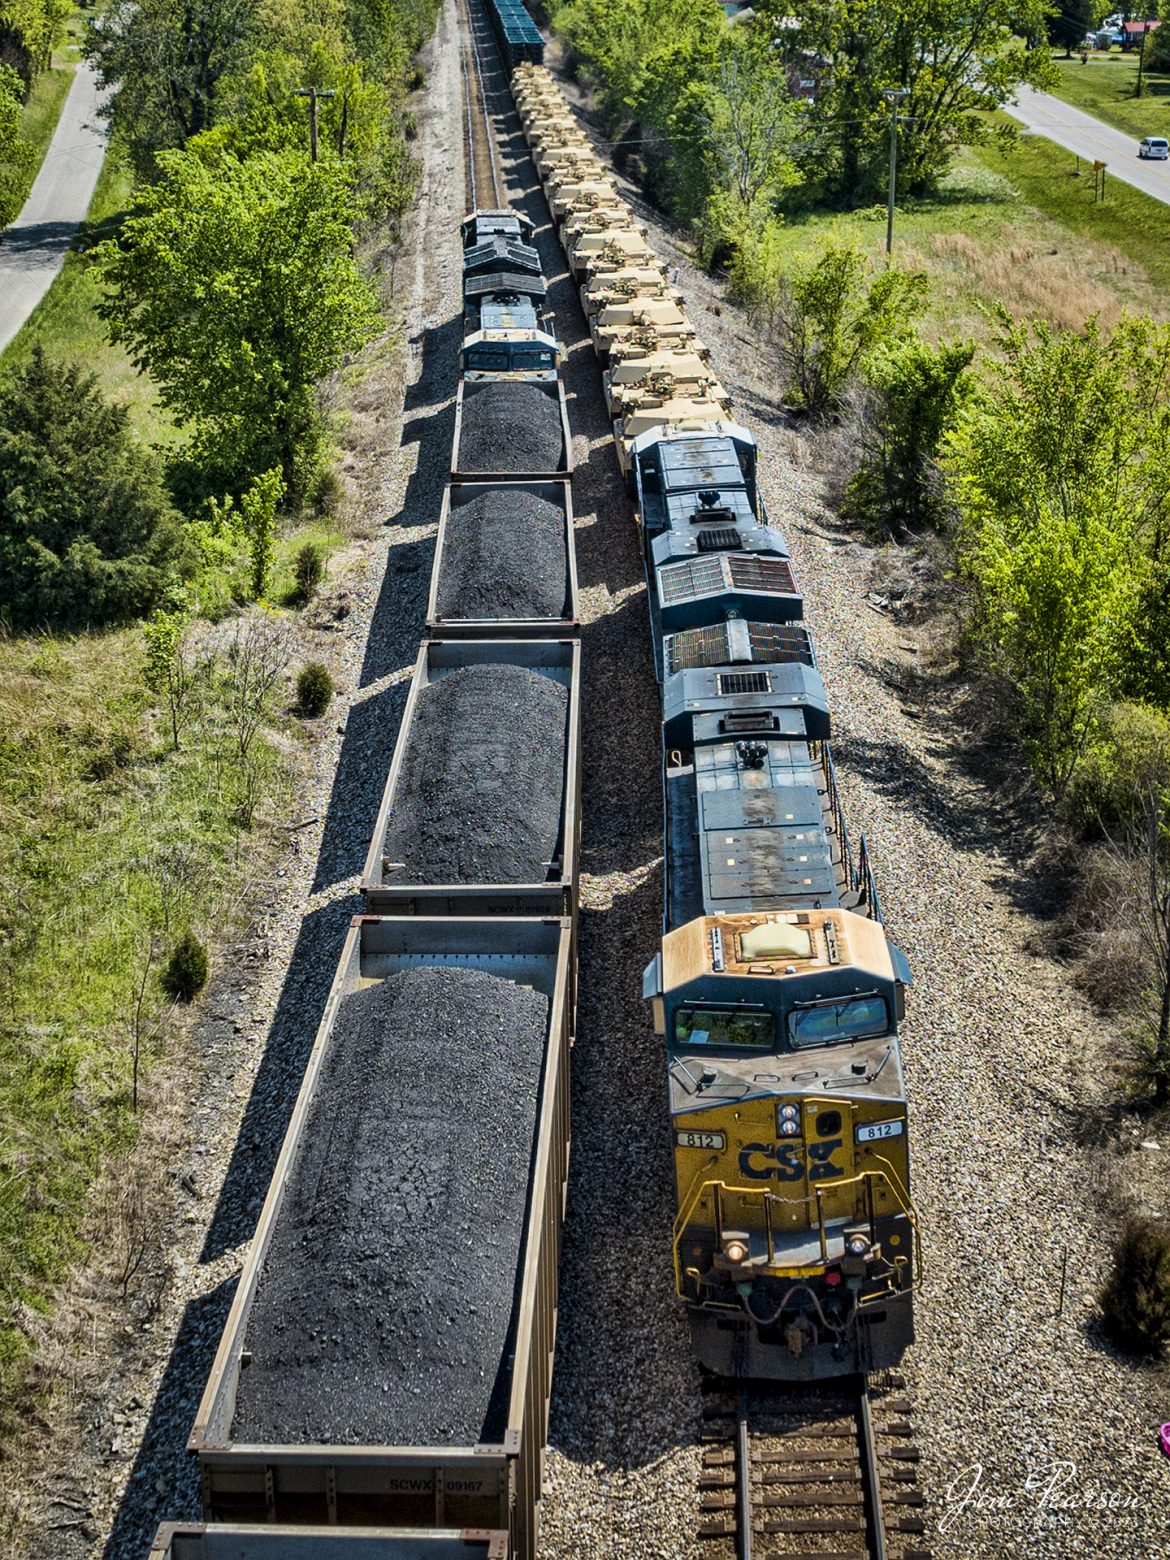 CSX M512 waits on the main with 8 flats of M1 Tanks as loaded coal train C904 takes the siding at the north end of Kelly, Ky so they can pass each other on April 25th, 2023. M512 was too long at 13,000 plus feet to fit into the siding so they had to wait on the C904 to clear the north end of the siding, before continuing their move on the Henderson Subdivision.

Tech Info: DJI Mavic 3 Classic Drone, RAW, 24mm, f/2.8, 1/1600, ISO 130.

#trainphotography #railroadphotography #trains #railways #dronephotography #trainphotographer #railroadphotographer #jimpearsonphotography #kentuckytrains #KellyKy #mavic3classic #drones #trainsfromtheair #trainsfromadrone #csxhendersonsubdivision #kellyky #militarytrainmove